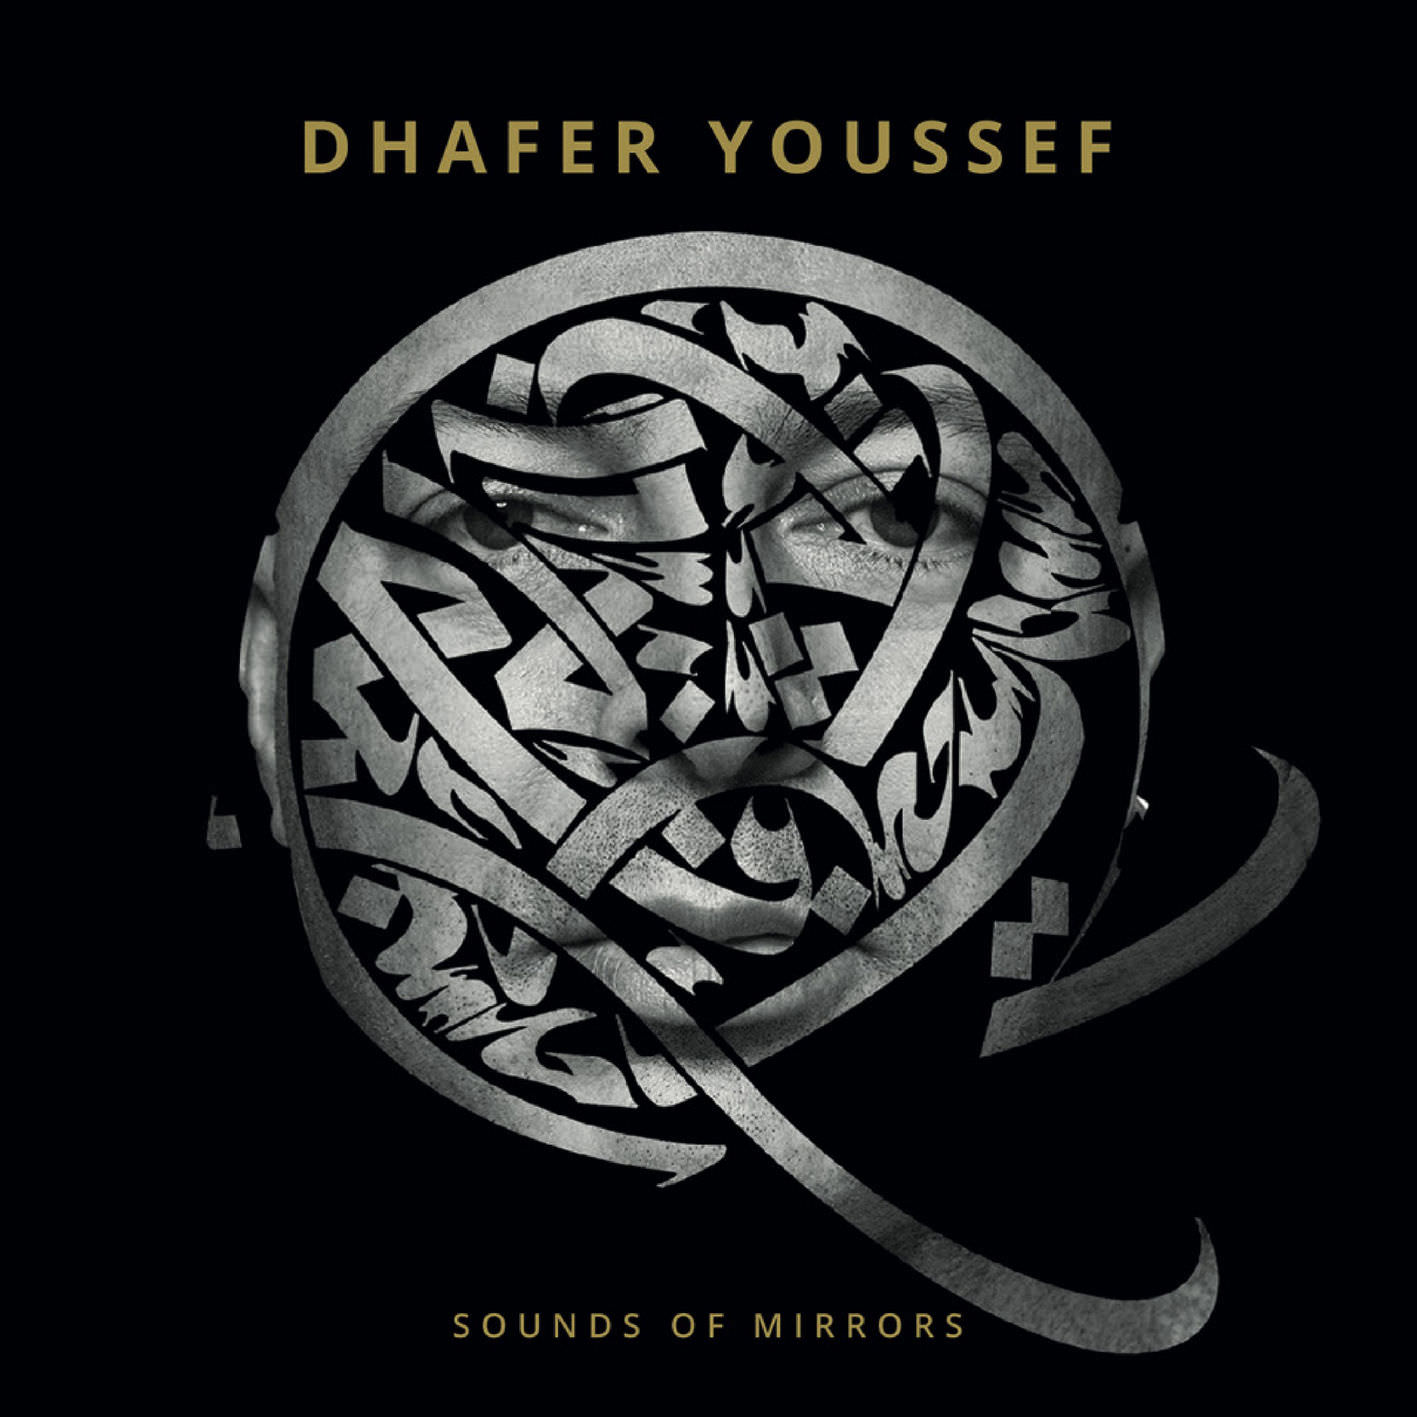 Dhafer Youssef - Sounds Of Mirrors (2018) [FLAC 24bit/96kHz]